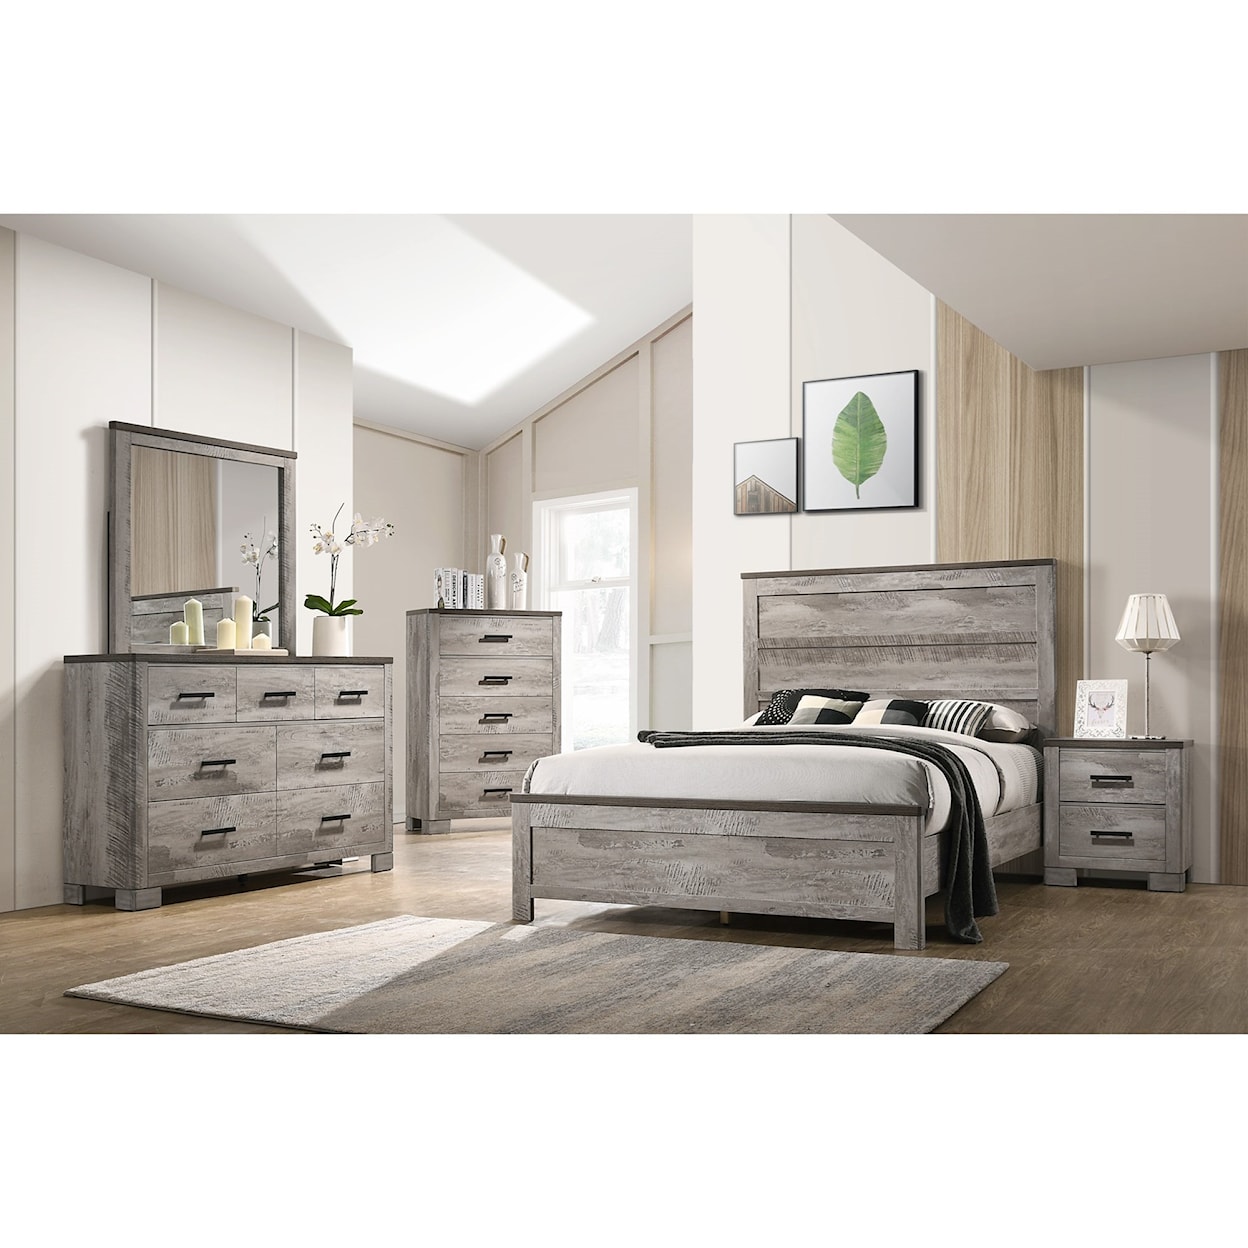 Elements International Millers Cove- King Panel Bed